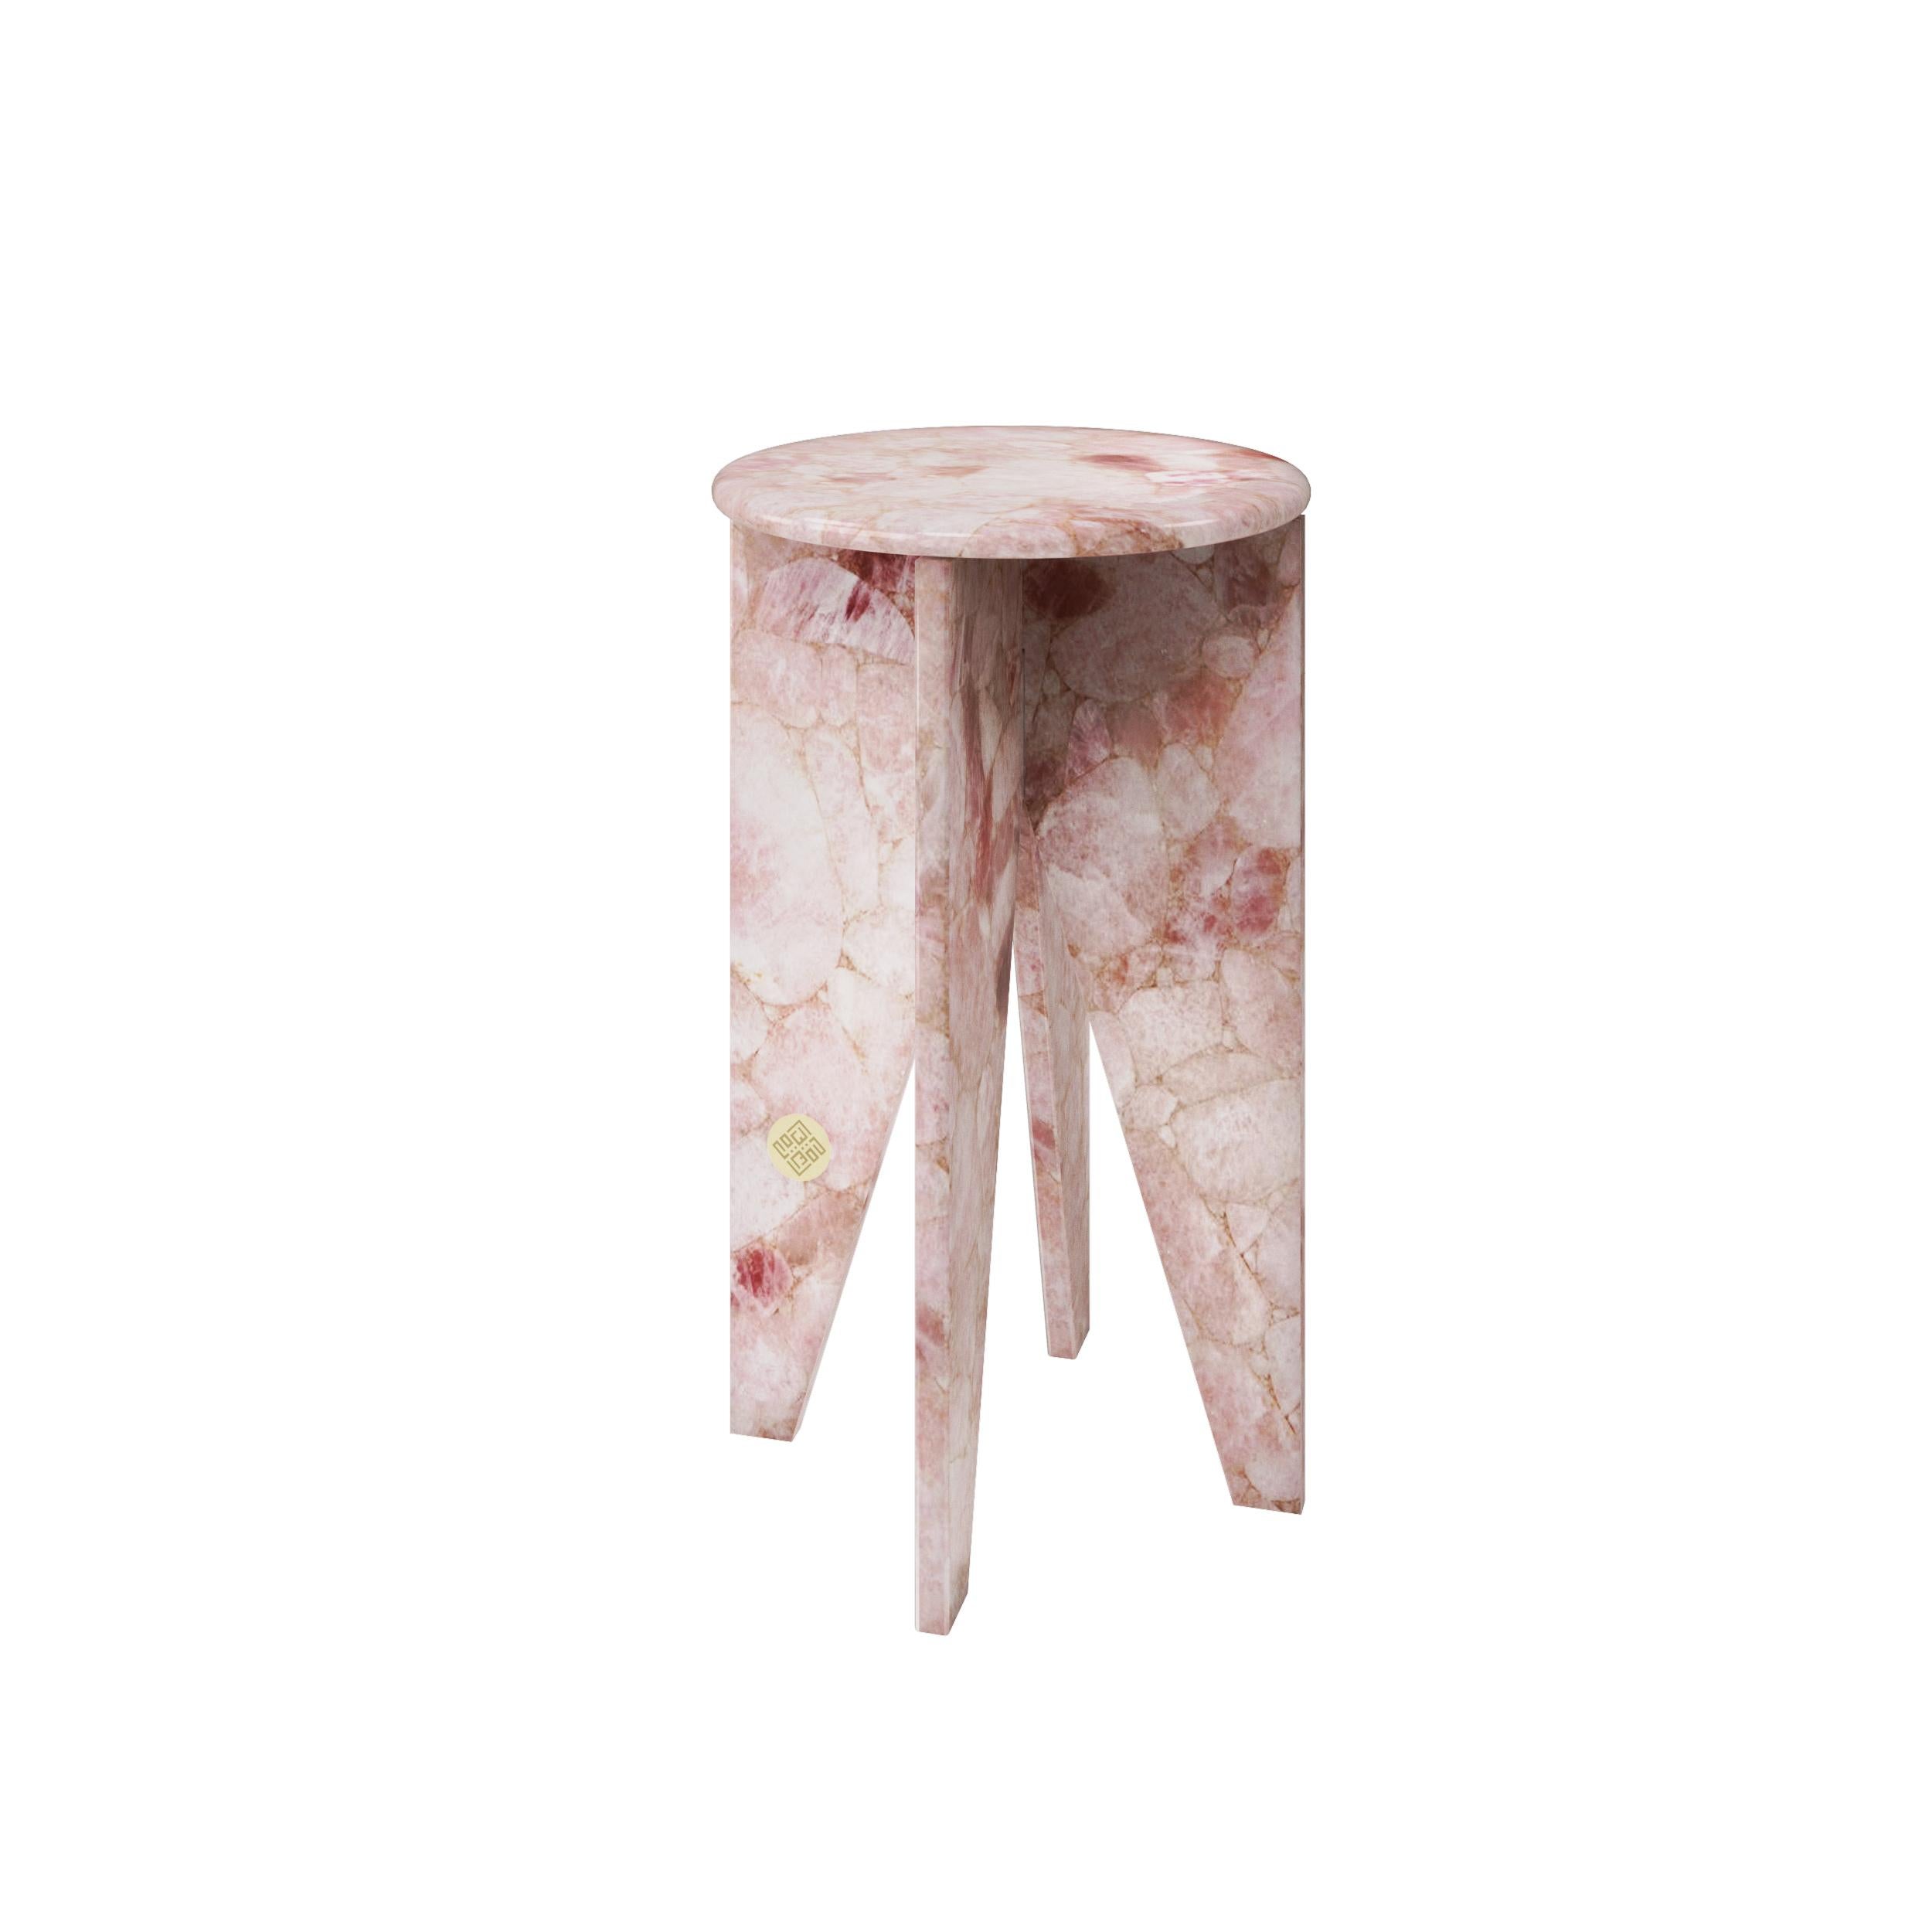 Quartz eli baby love side table handsculpted by Element&Co
Dimensions: 35 Ø x 60 cm
Materials: Rose quartz, Precious stone 

elementandco is a multidisciplinary studio based in Madrid, created by French-Spanish designer Sasha Sanchez and